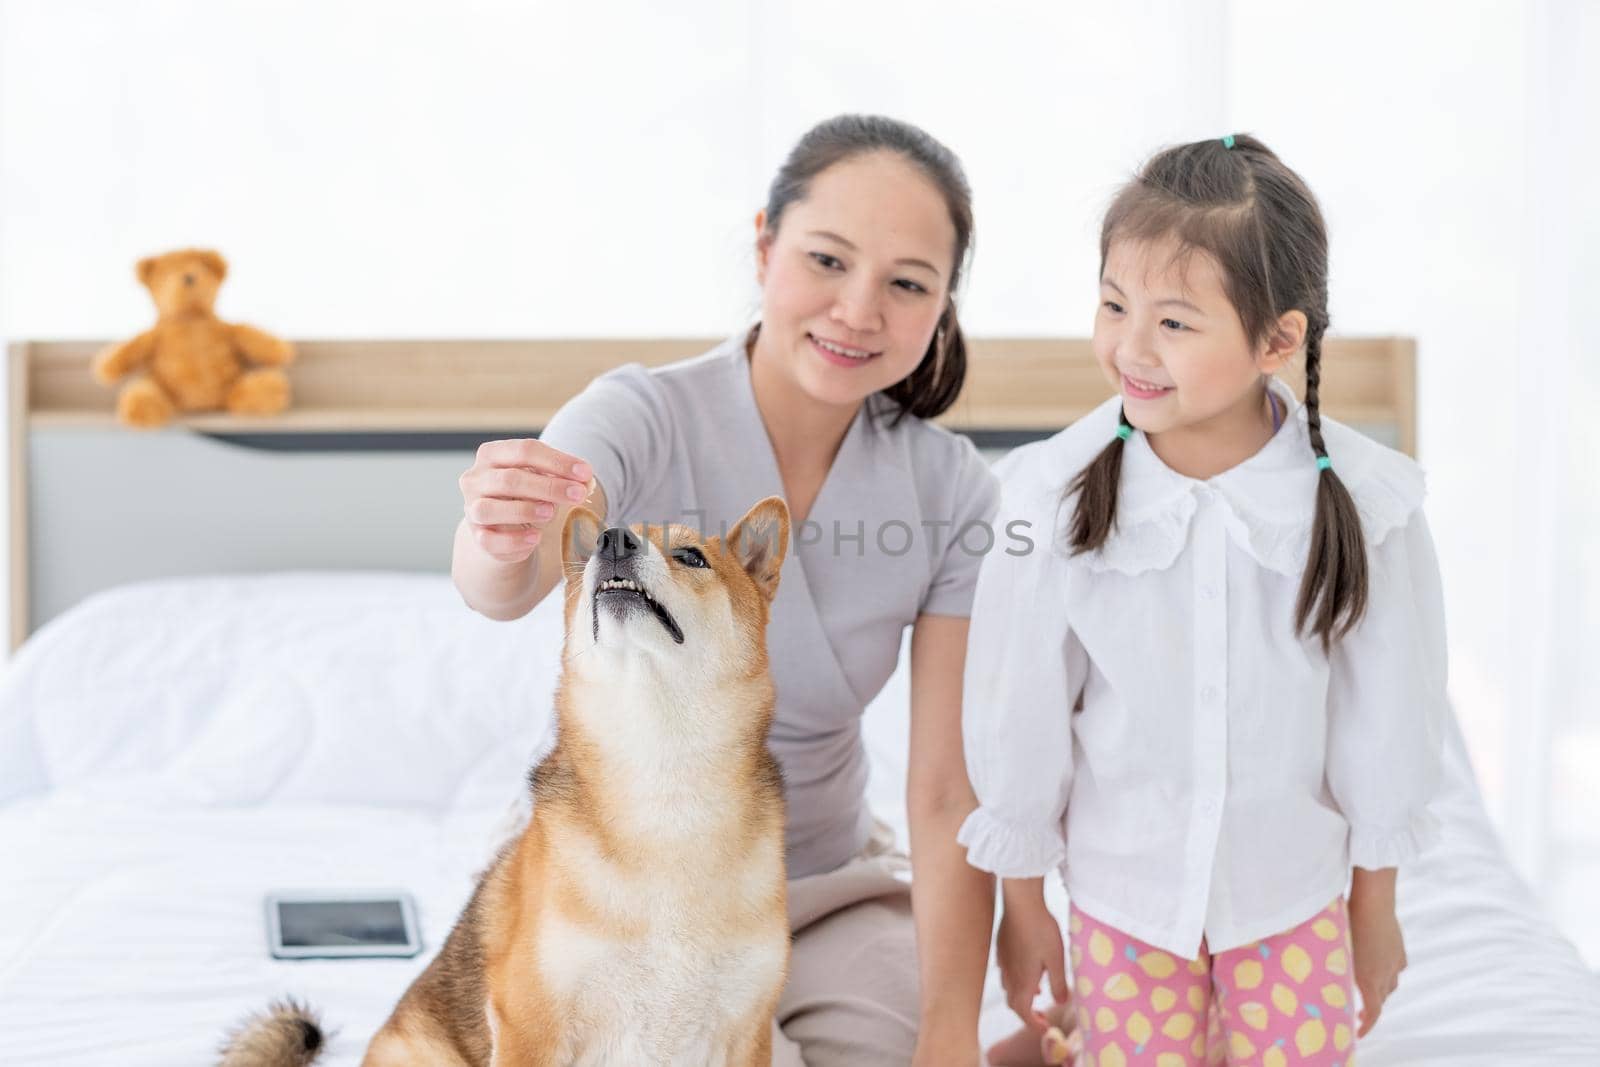 Asian mother play fun with Shiba dog by using some food to make it interesting and sit near little girl on bed. Concept of happy family feel relax to stay home with their own pets.